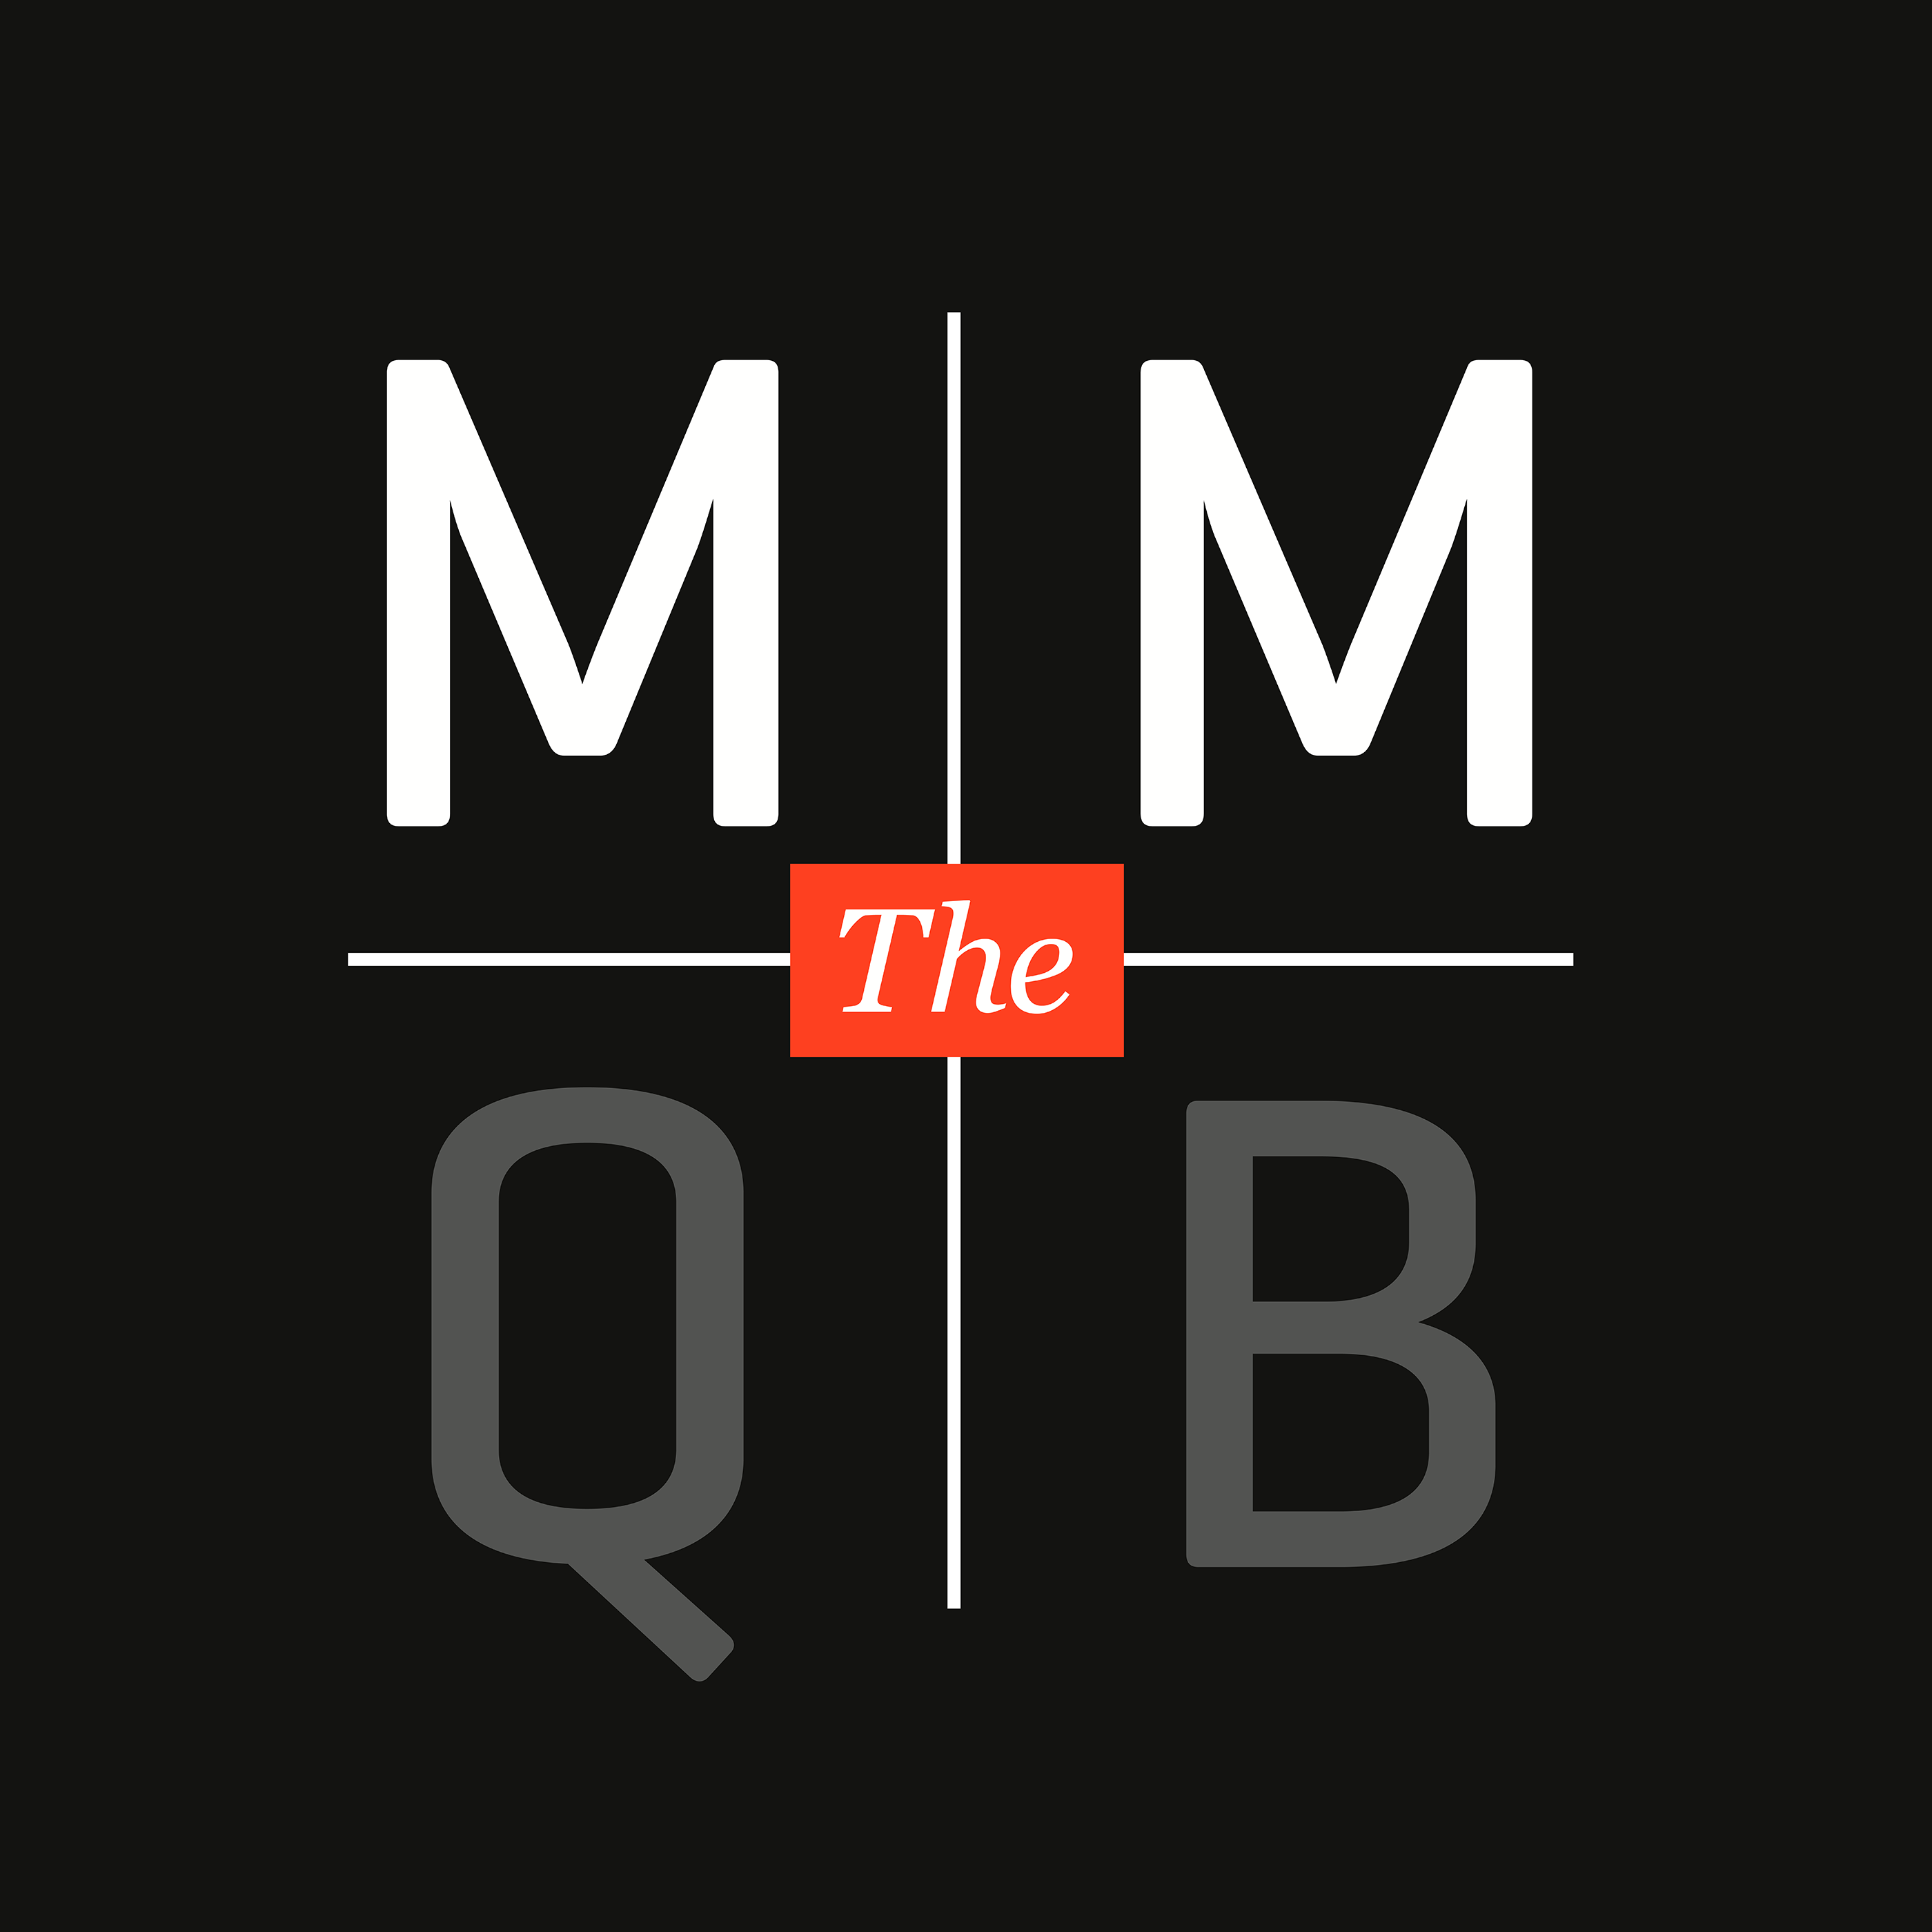 Fresh update on "rich eisen" discussed on The MMQB NFL Podcast